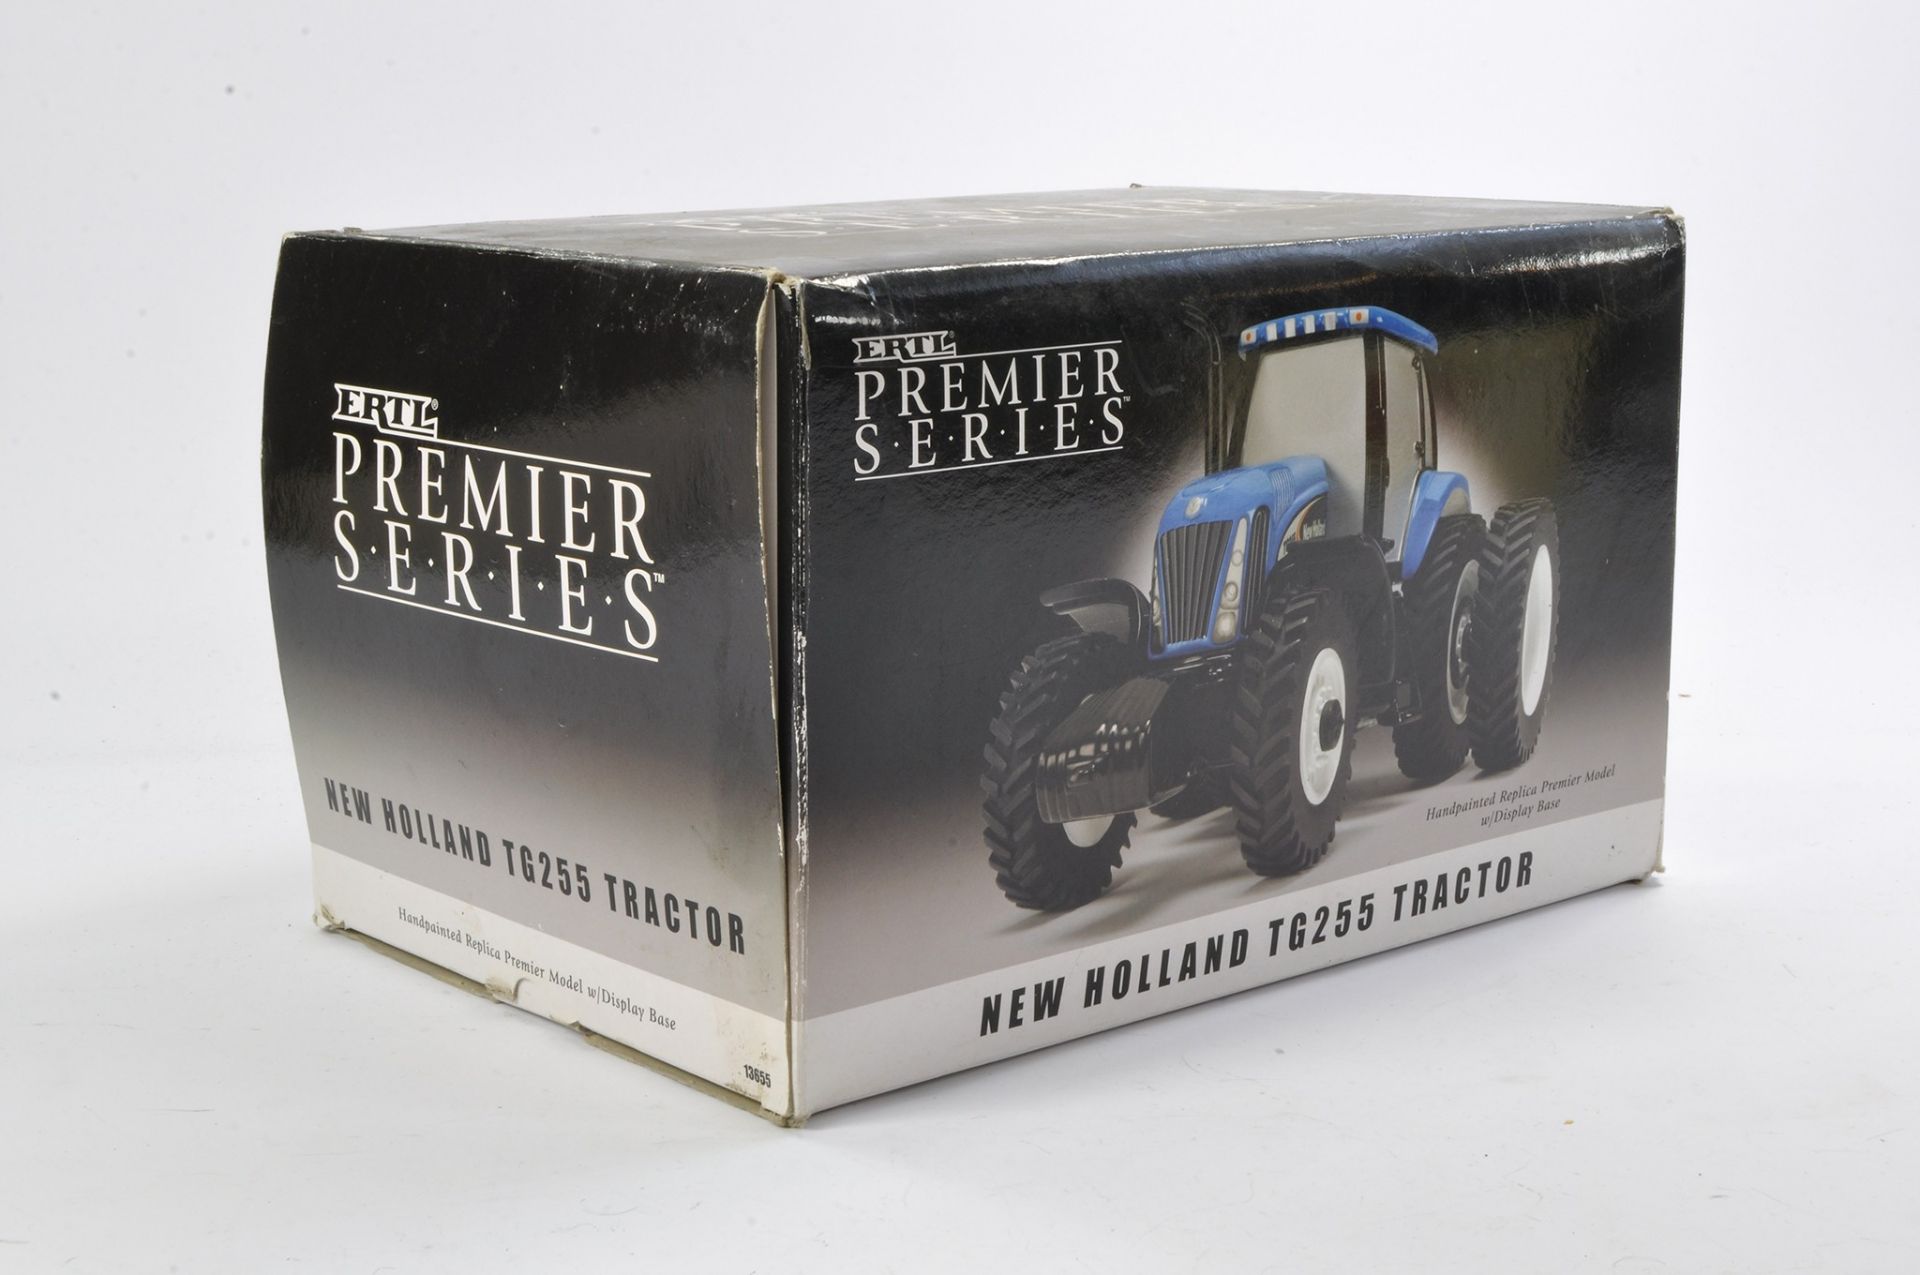 Ertl 1/32 Premier Series Resin New Holland TG255 Tractor. Looks to be without fault in original box.